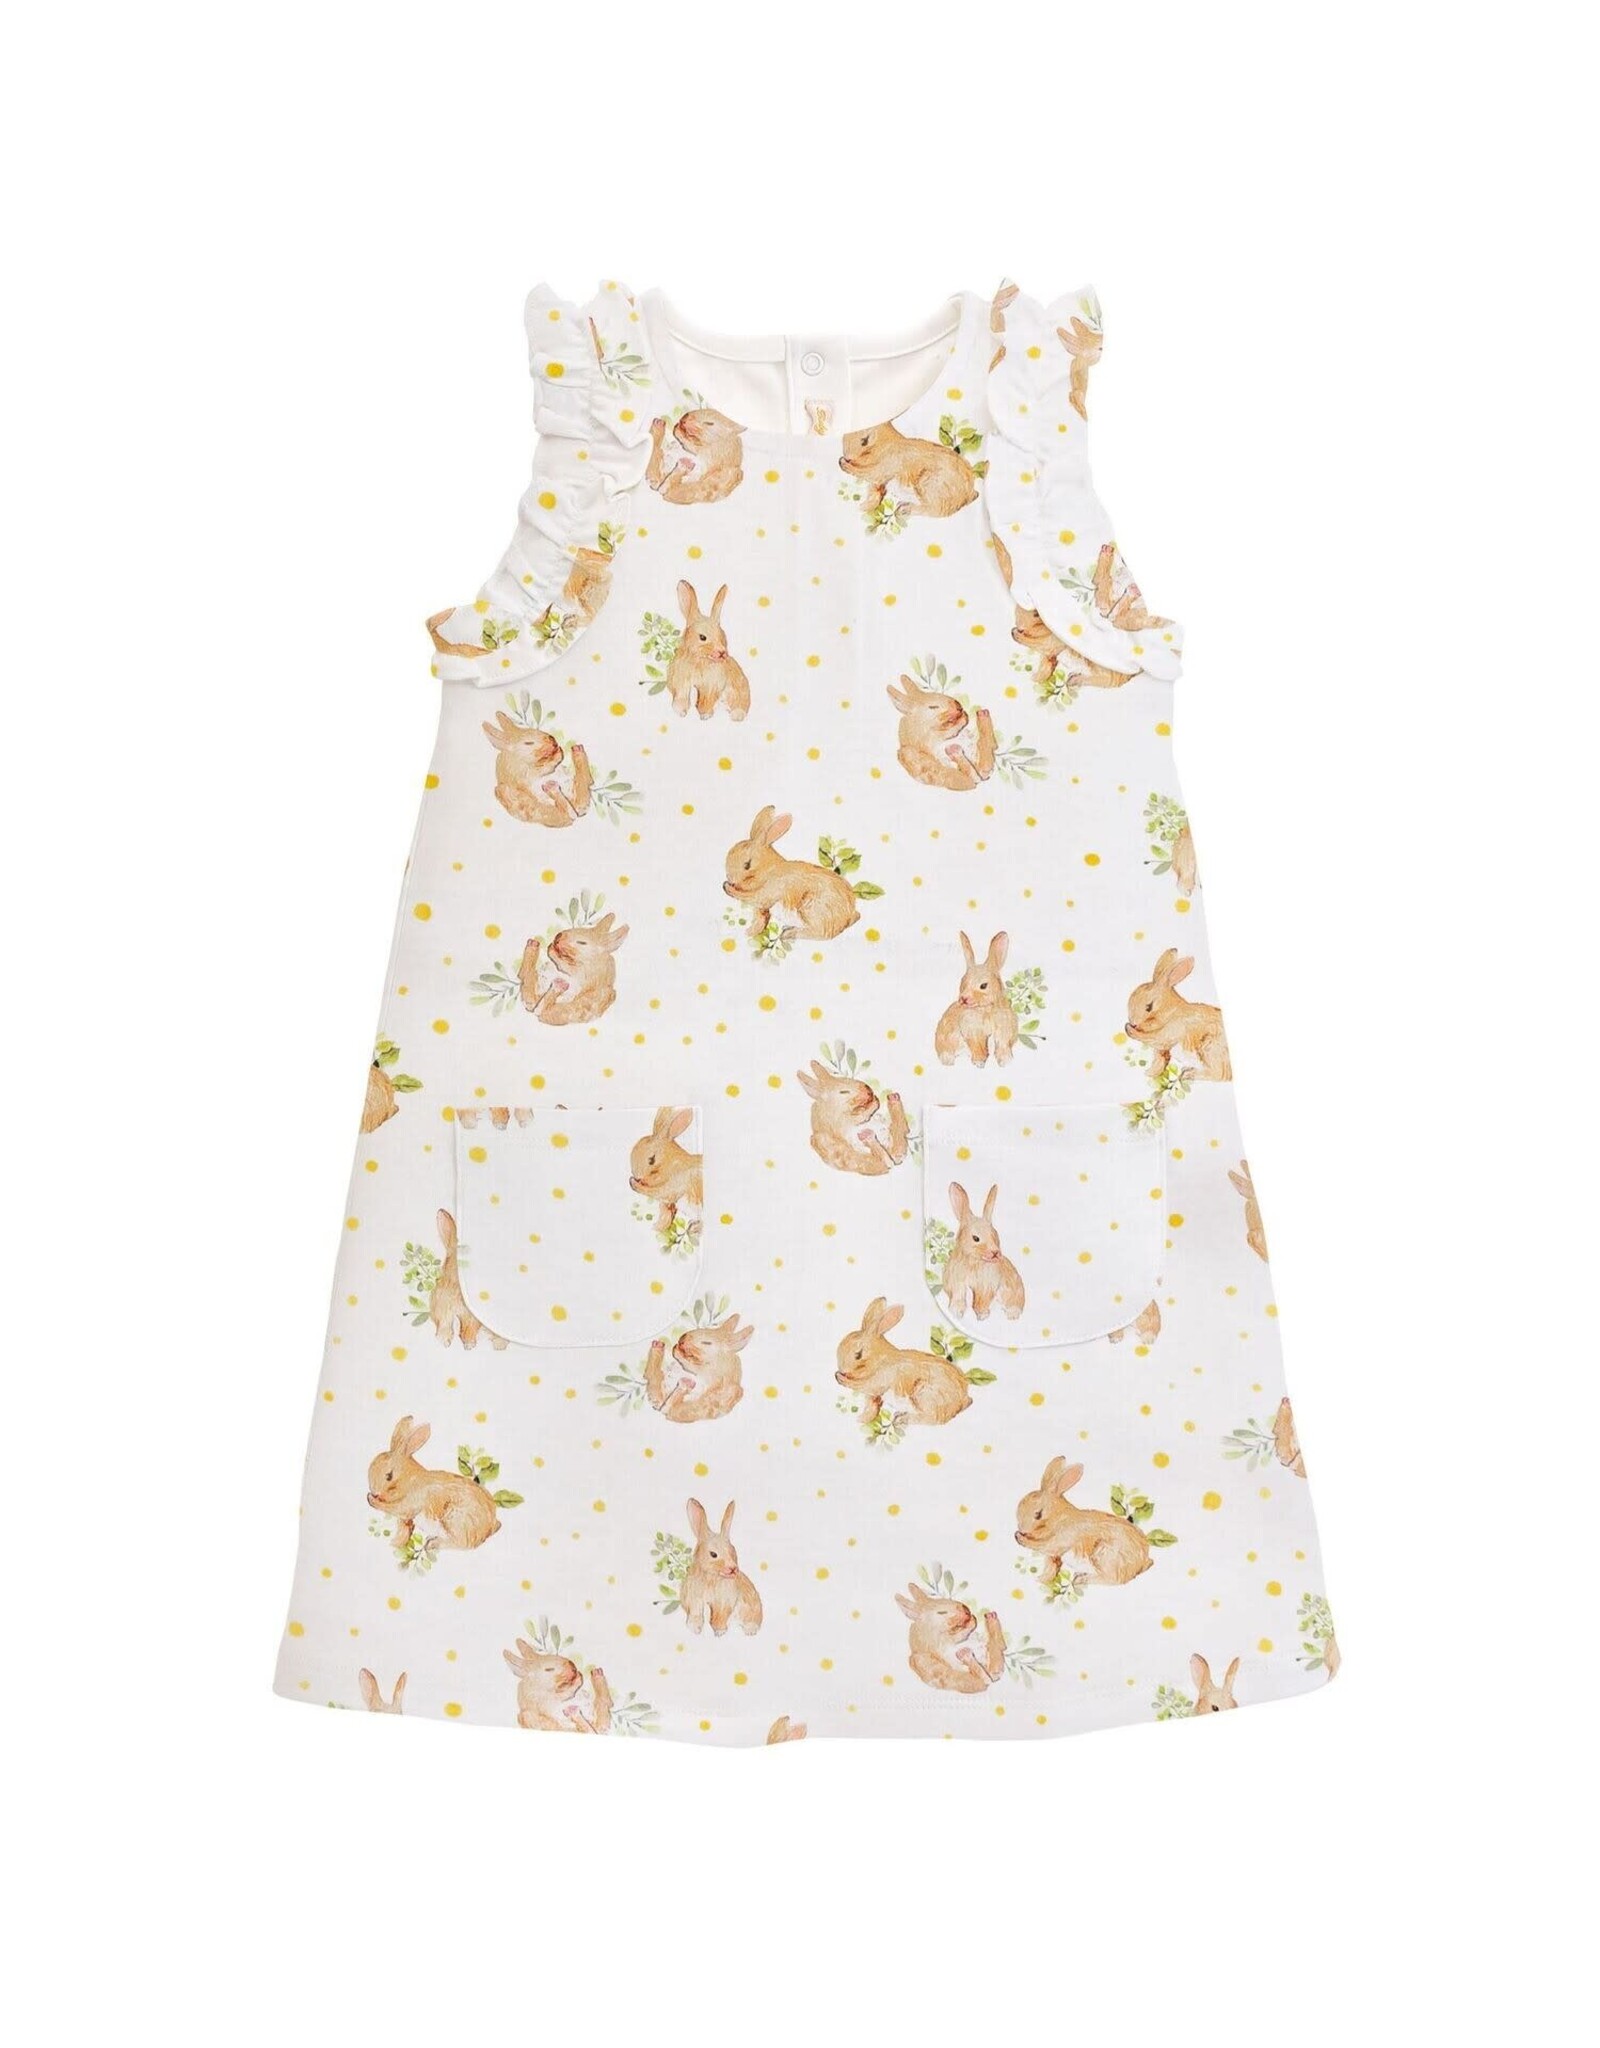 Baby Club Chic Adorable Bunnies Toddler Dress